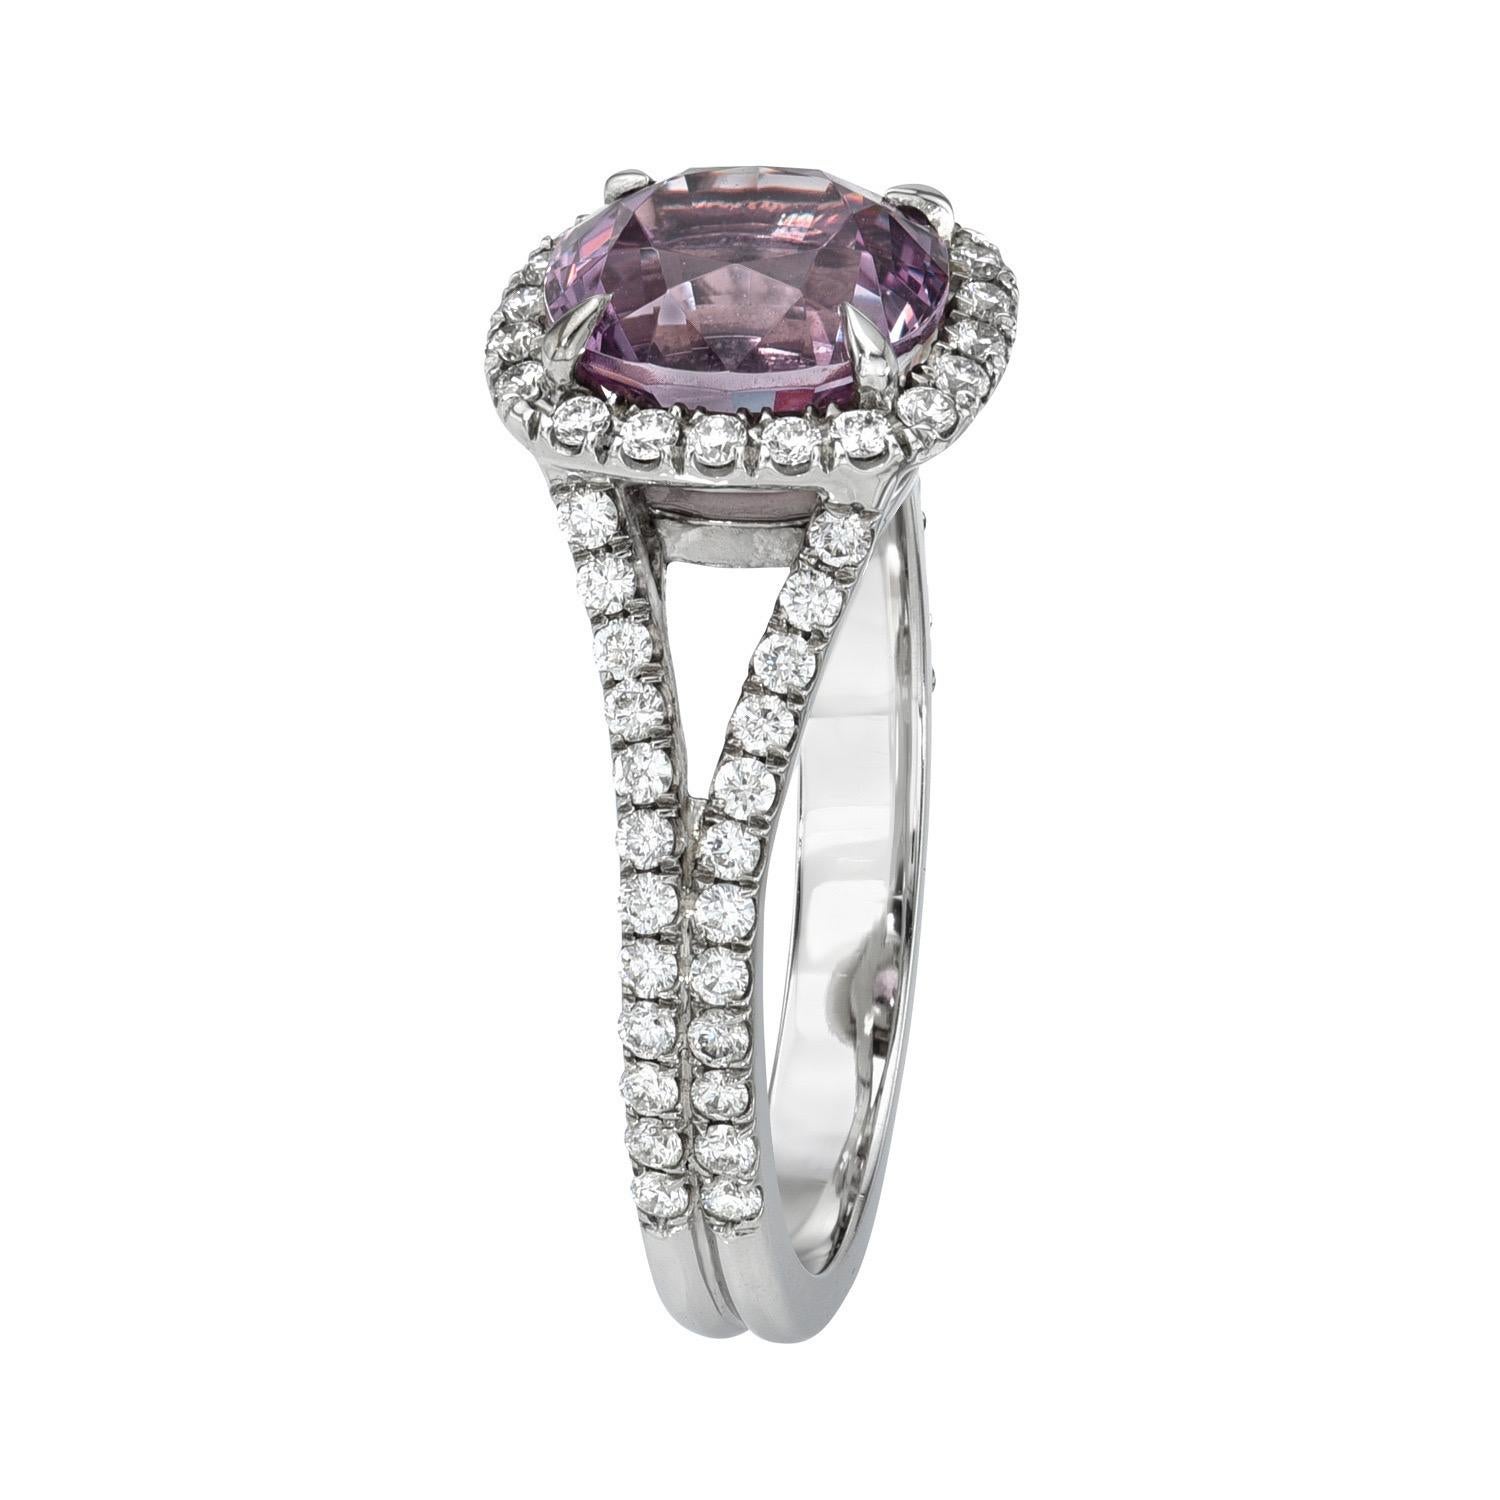 2.22 carat Pink Spinel cushion platinum ring, decorated with a total of 0.43 carats of round brilliant diamonds.
Ring size 6. Resizing is complementary upon request.
Returns are accepted and paid by us within 7 days of delivery.

Please FOLLOW the